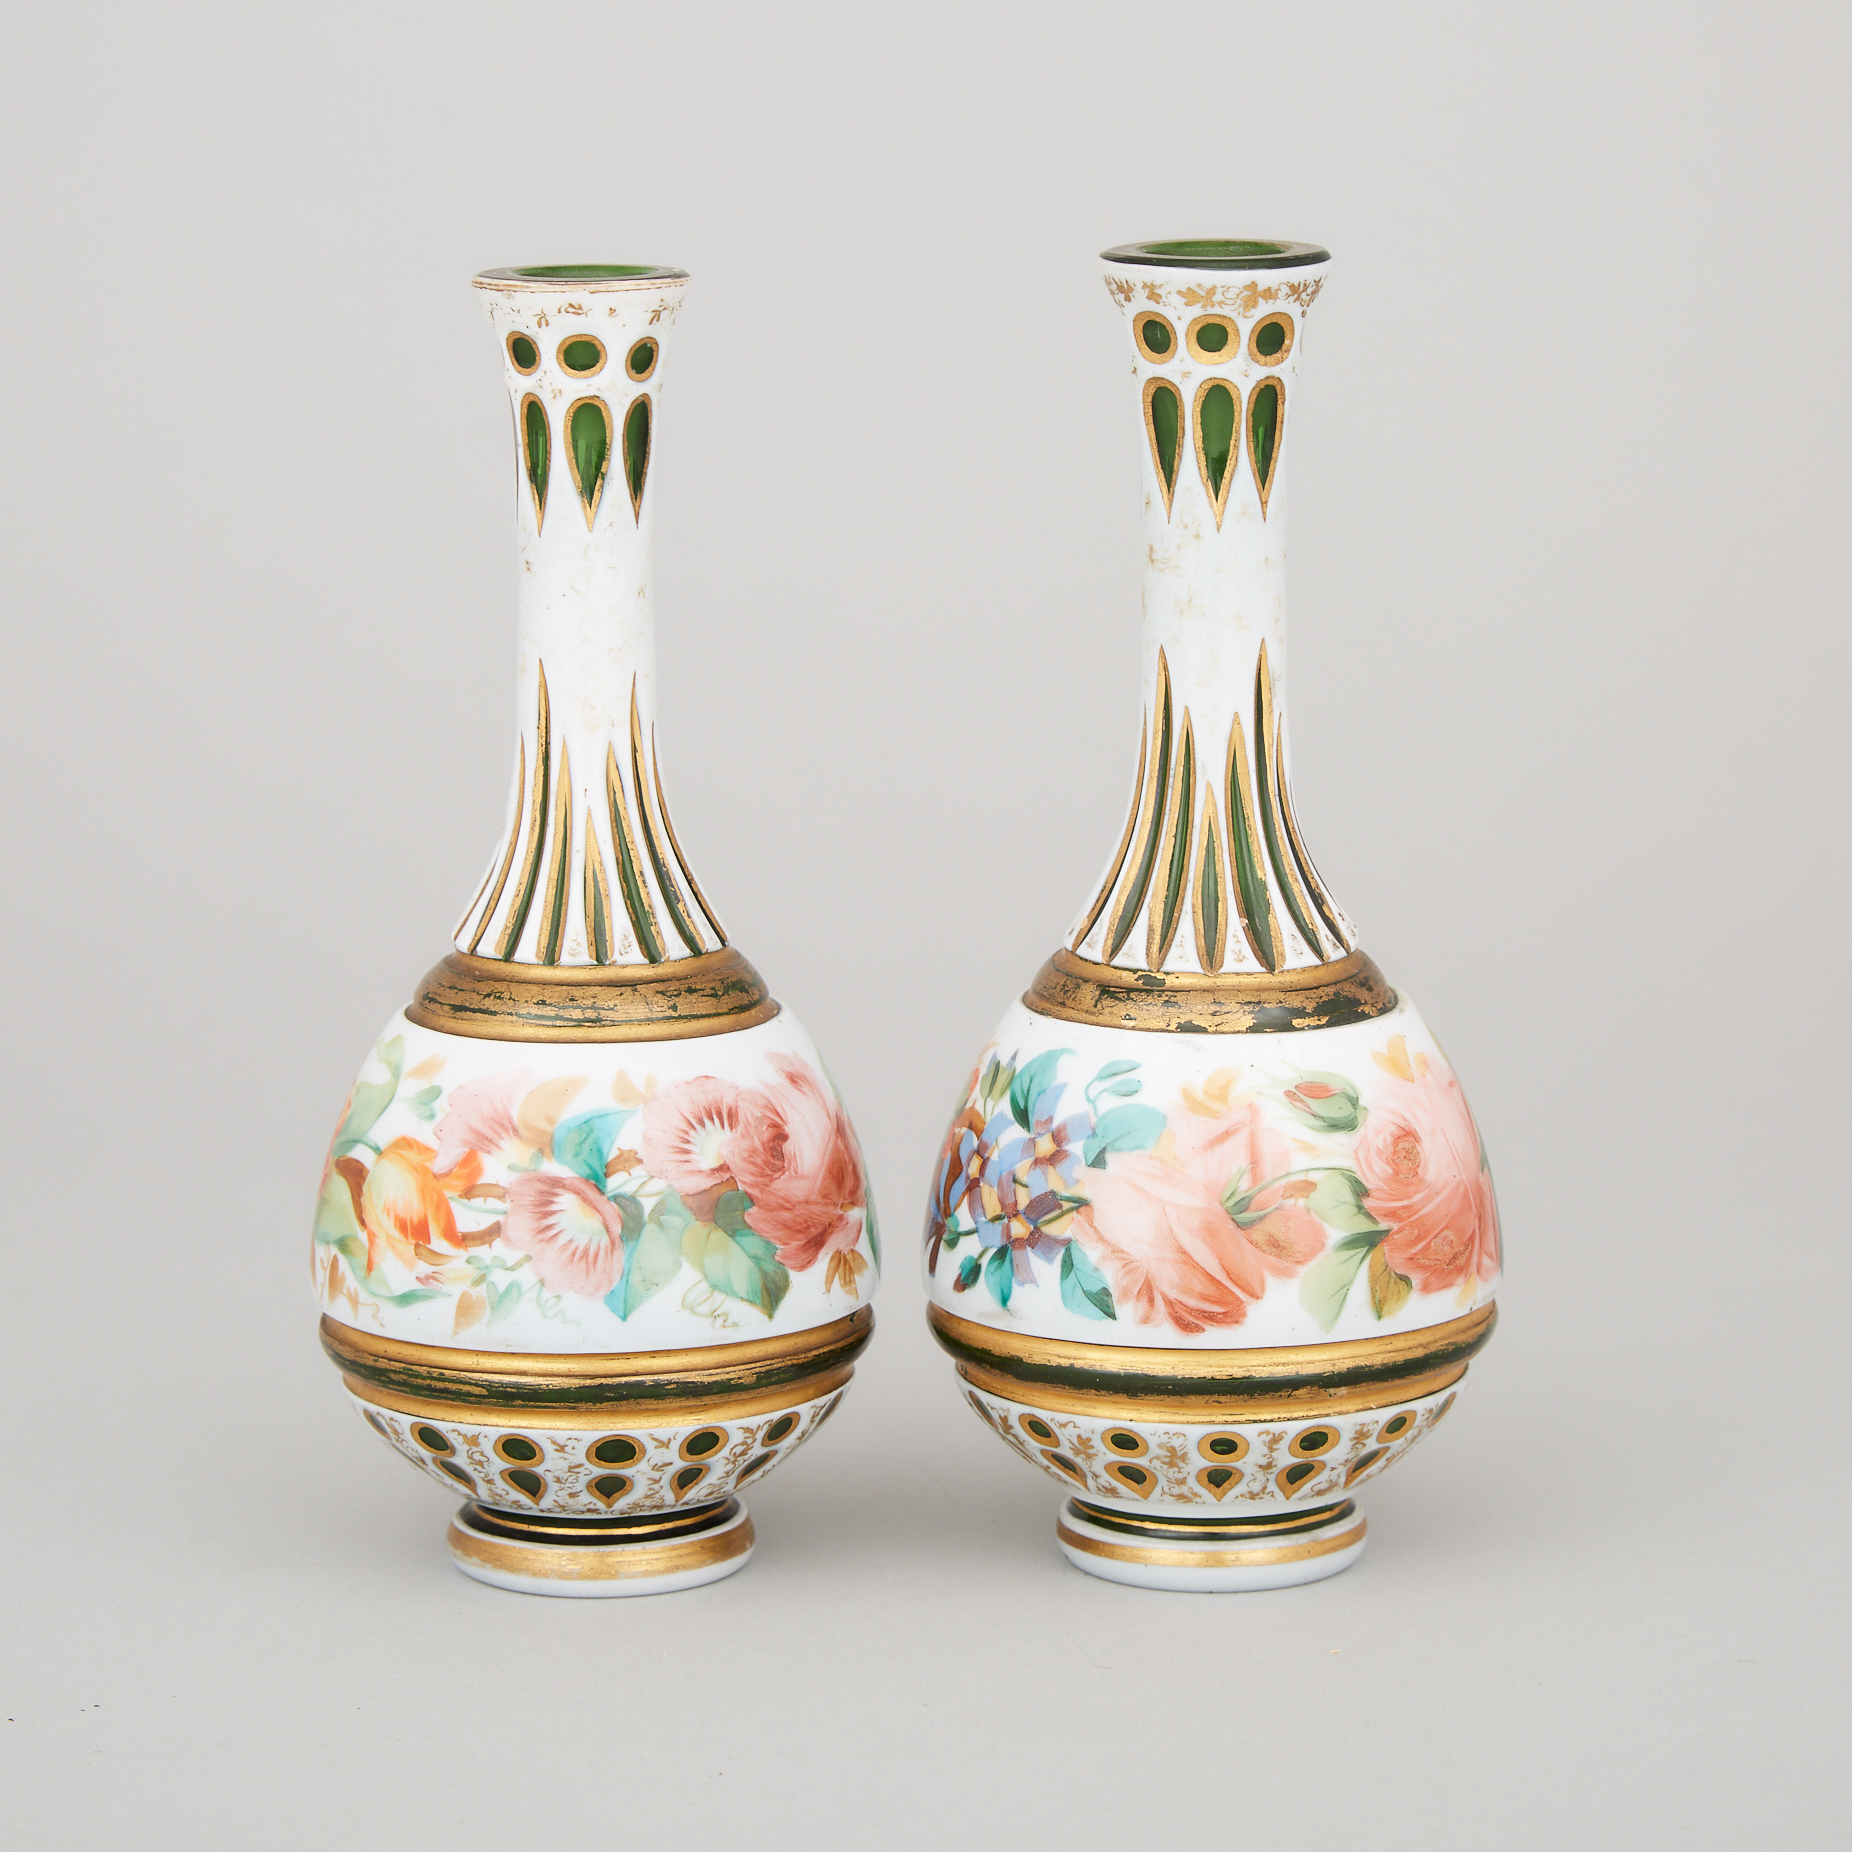 Pair of Bohemian Overlaid, Enameled and Gilt Green Glass Vases, late 19th century